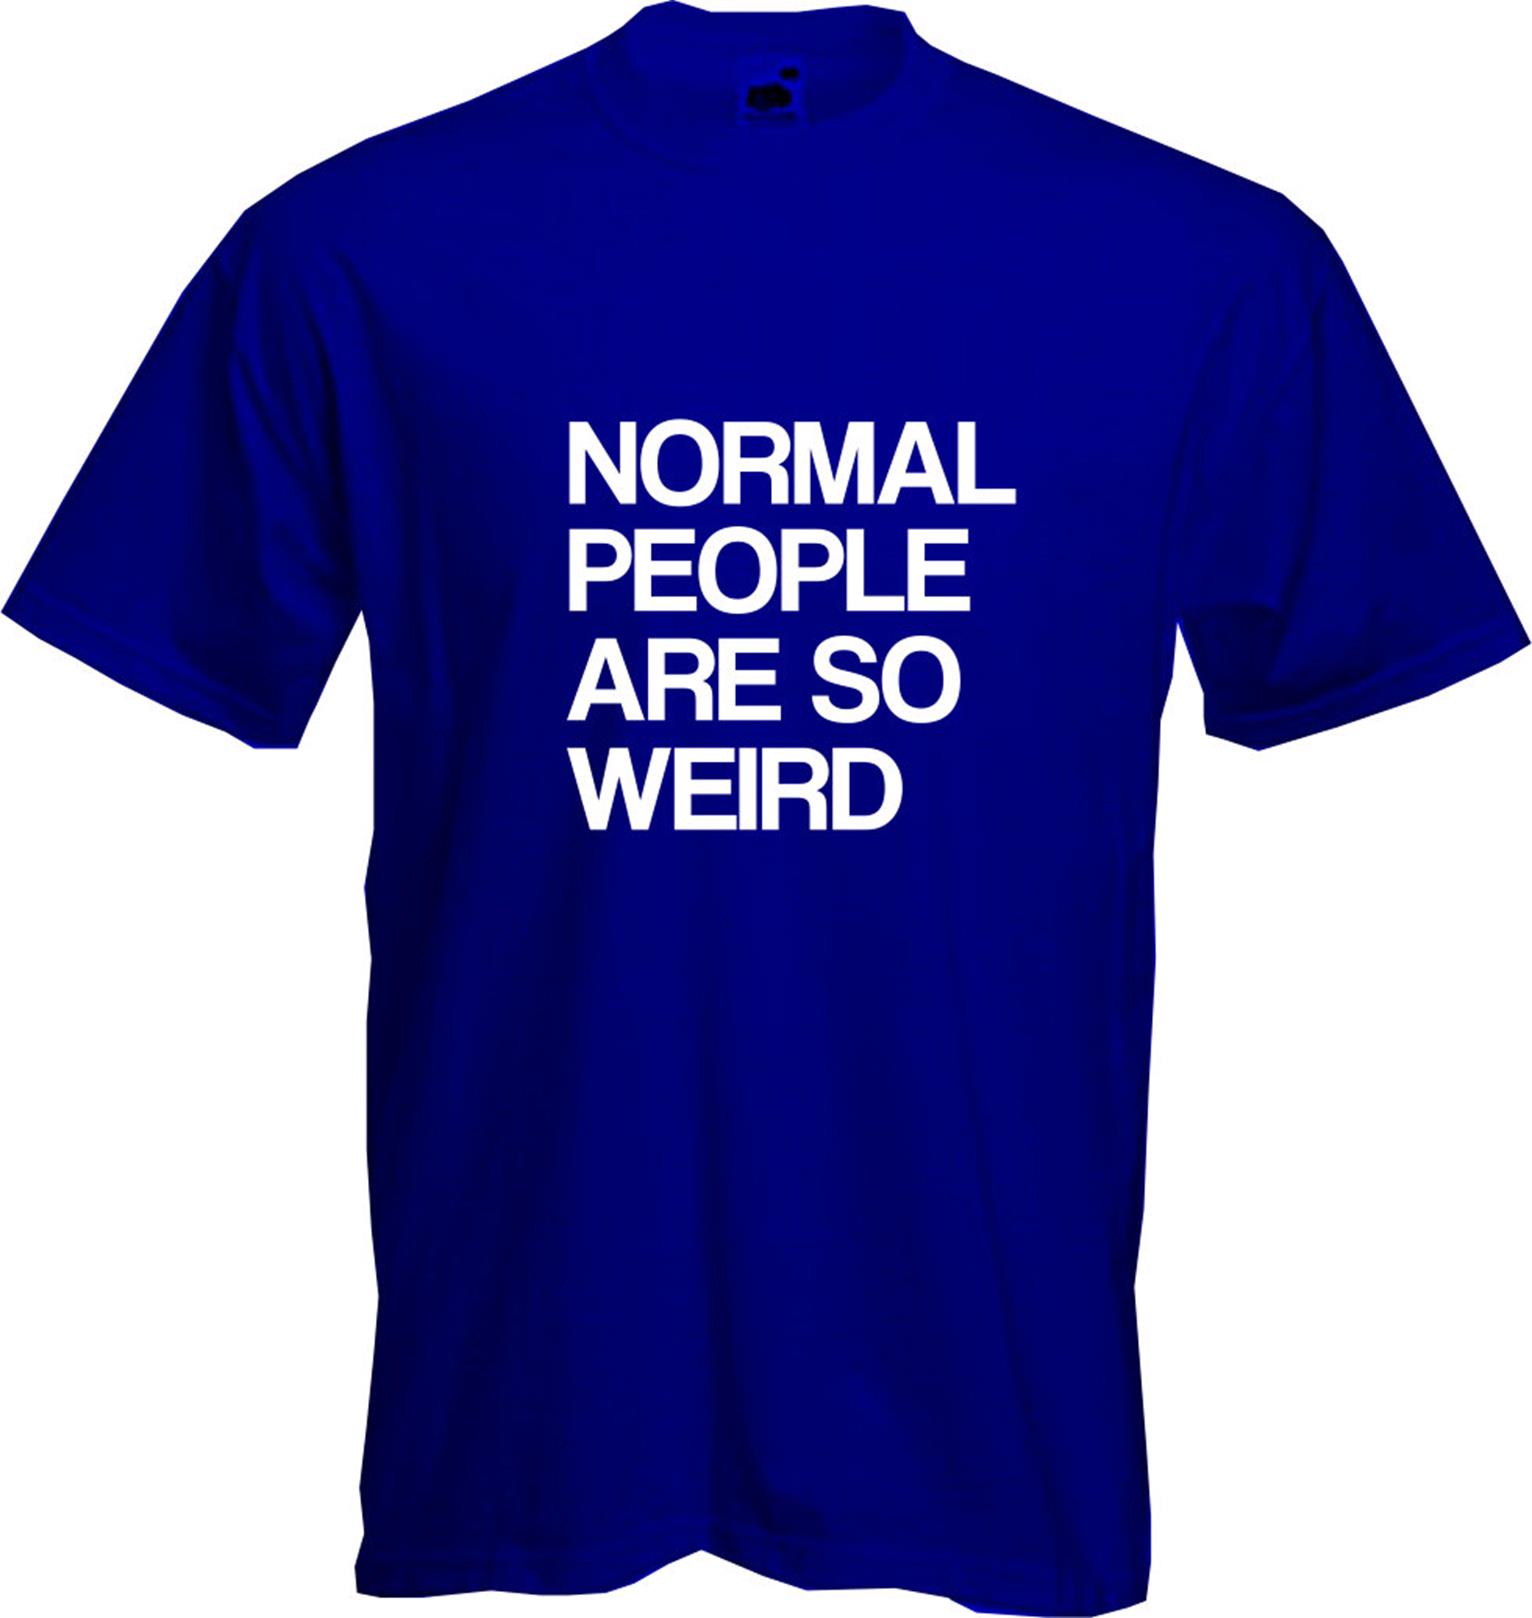 Geek T Shirt NEW Funny NORMAL PEOPLE ARE SO WEIRD Cool Quality